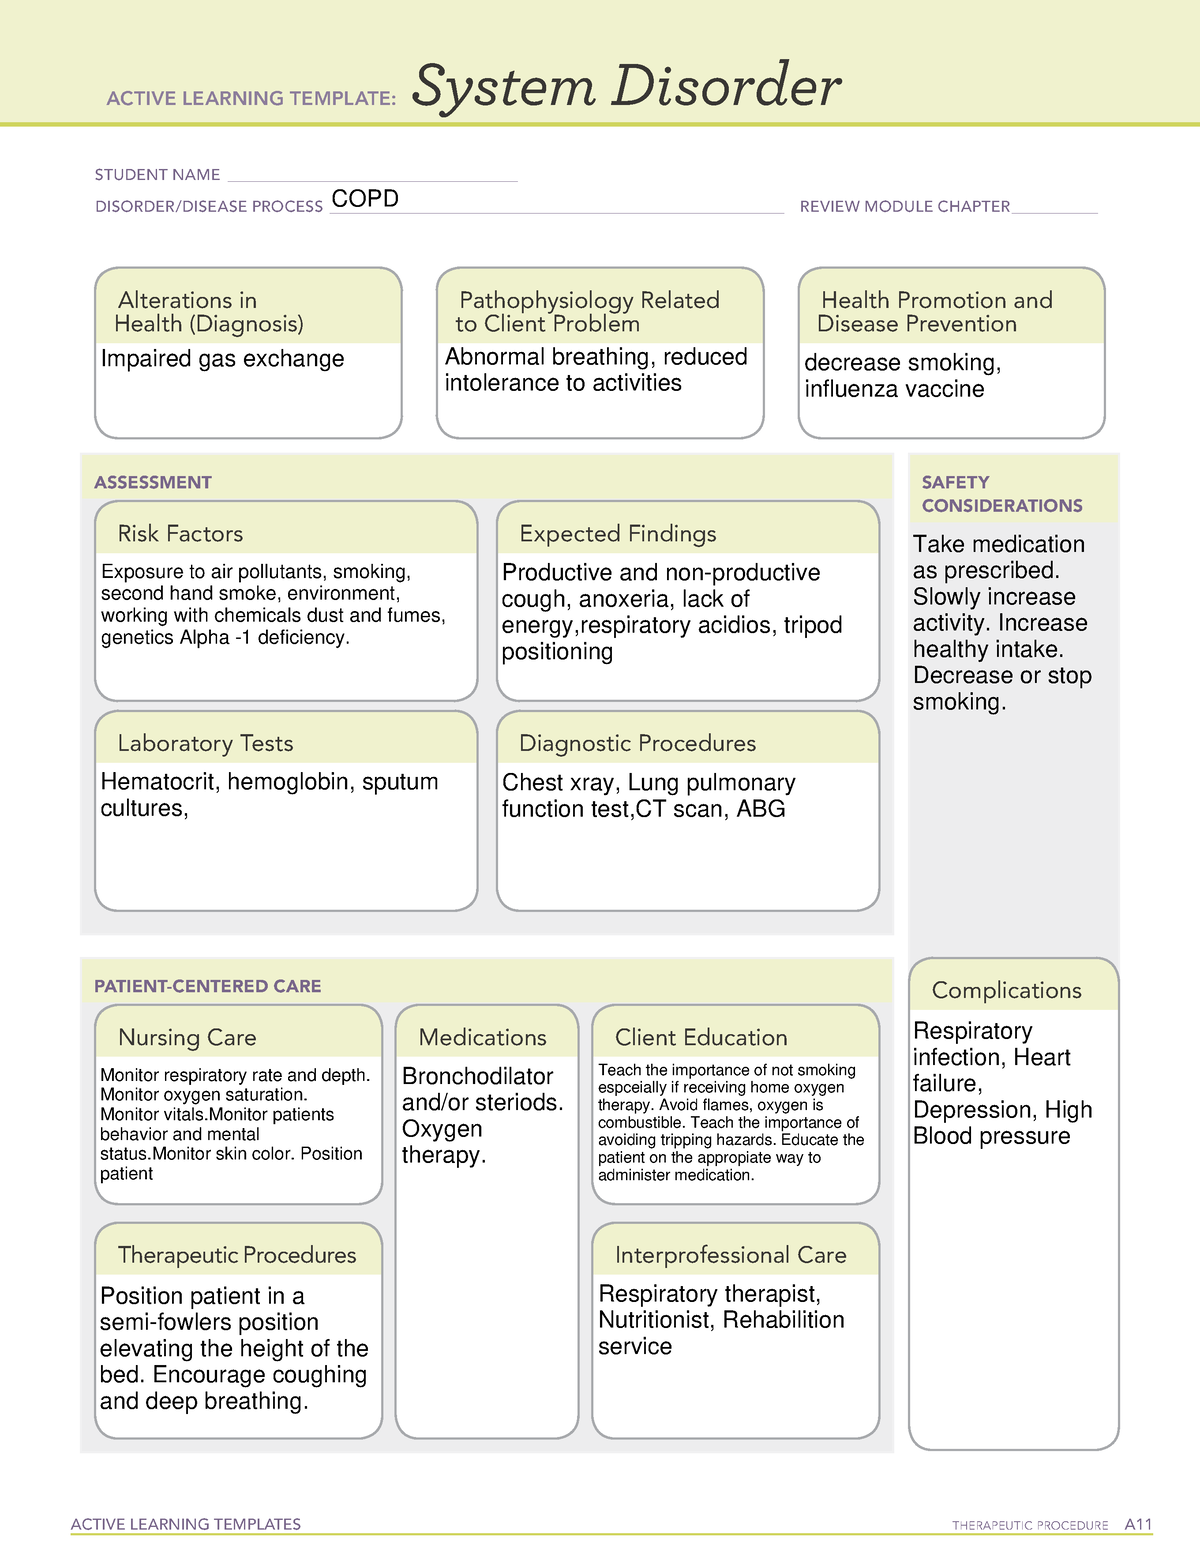 copd-active-learning-template-active-learning-templates-therapeutic